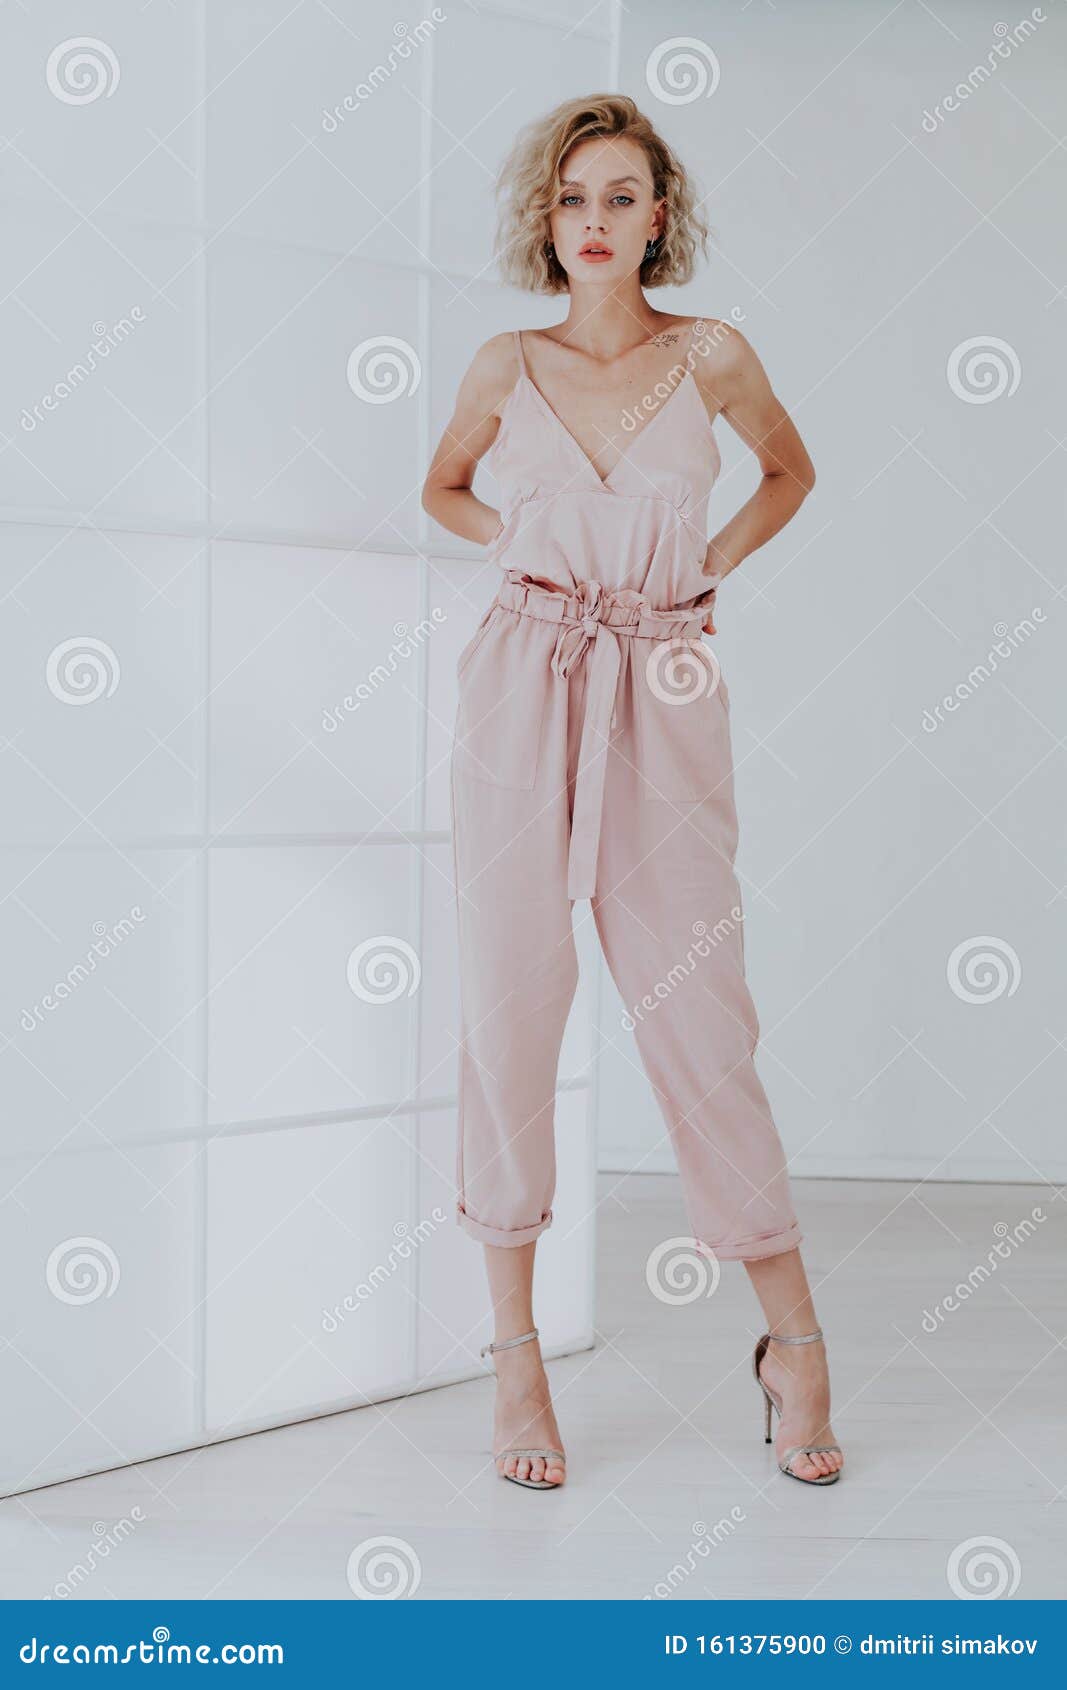 Fashion Portrait of a Beautiful Woman in Pink Clothes on a White ...